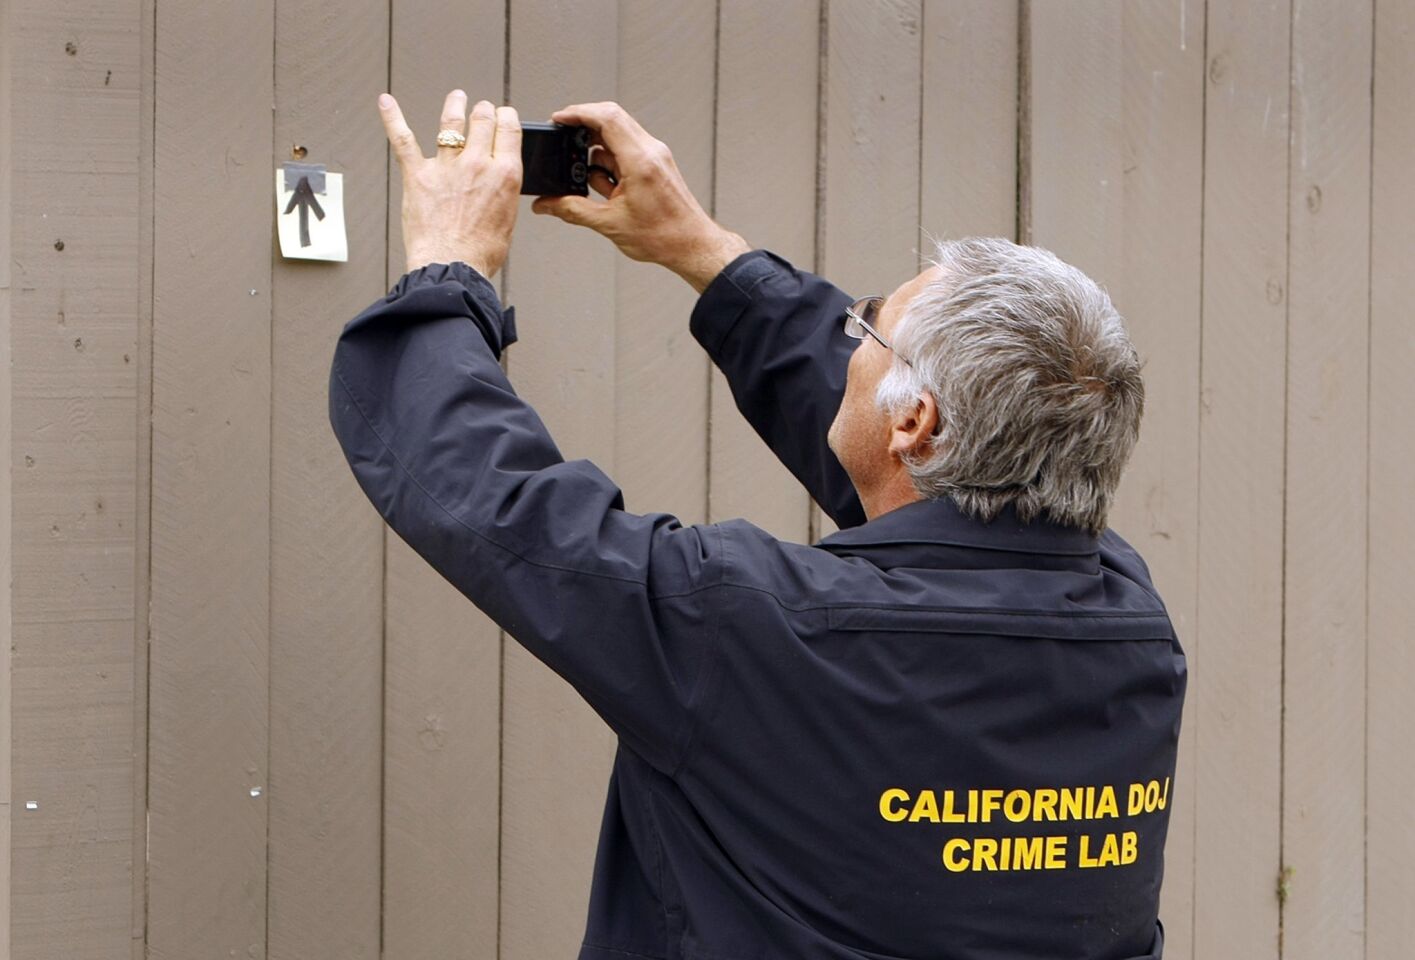 An investigator from the California Department of Justice Crime Lab collects evidence on Sabado Tarde Road on May 24 after the shooting rampage in Isla Vista.